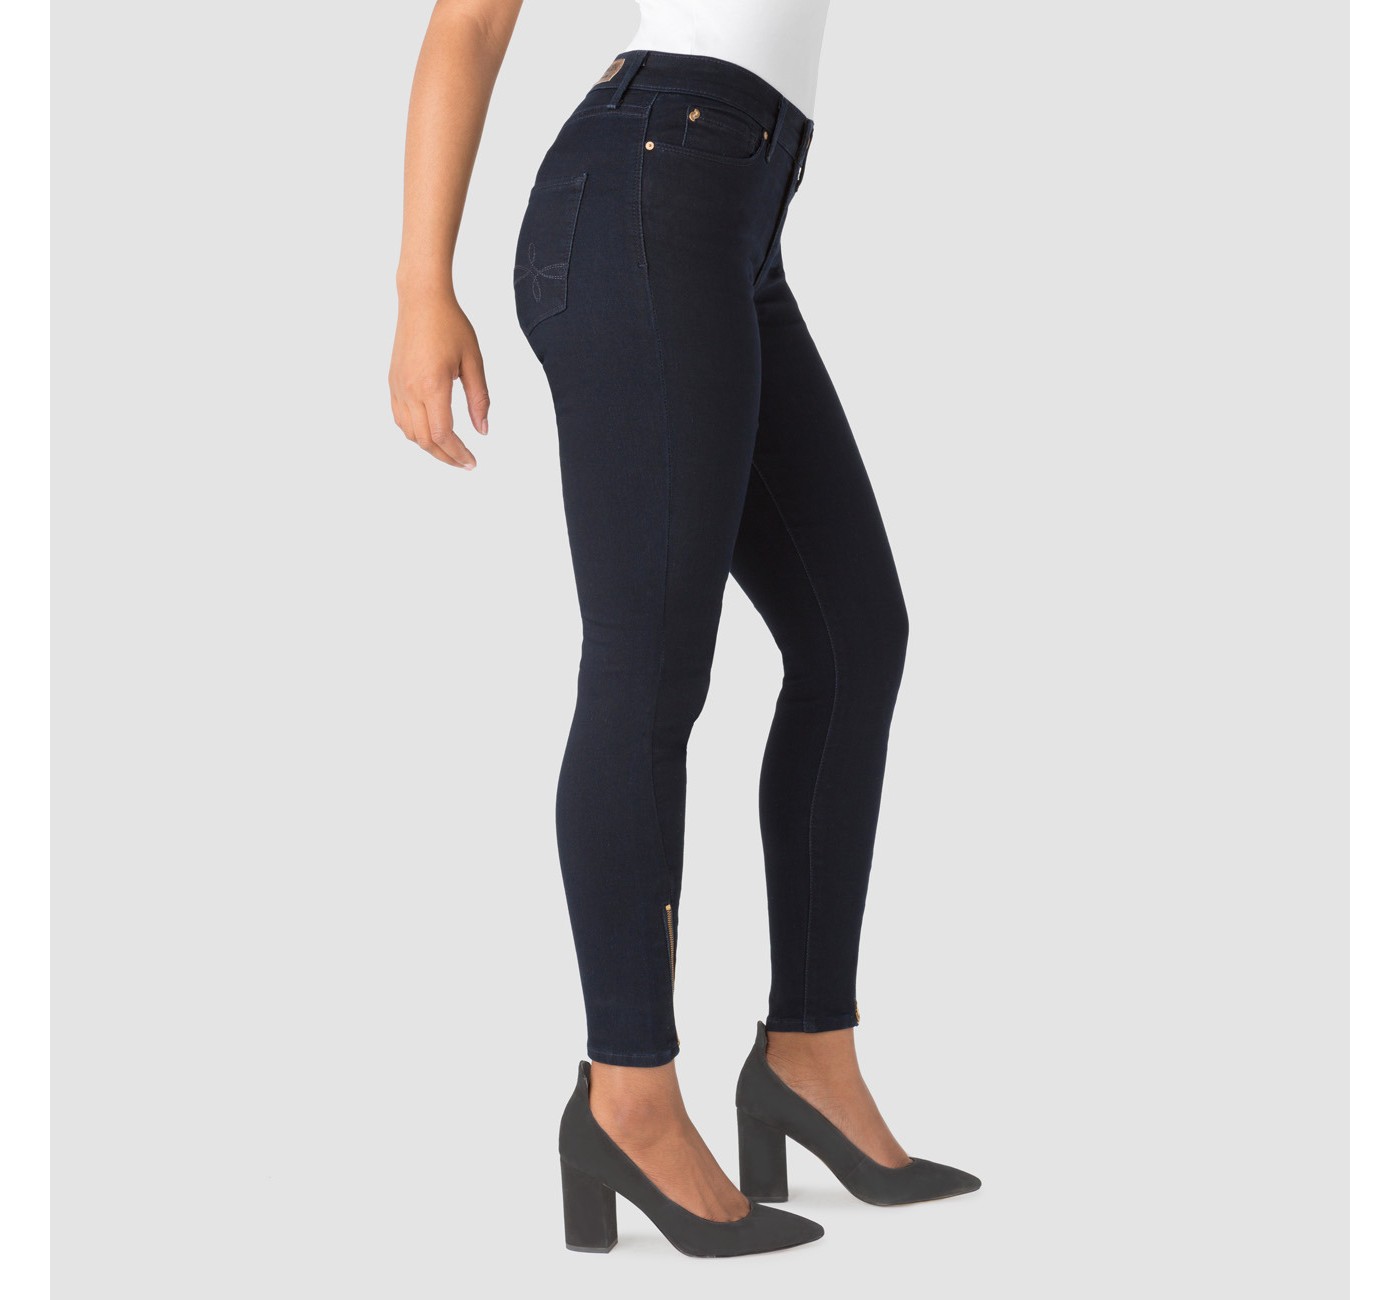 DENIZENÂ® from Levi'sÂ® Women's High-Rise Ankle Skinny Jeans - image 2 of 4